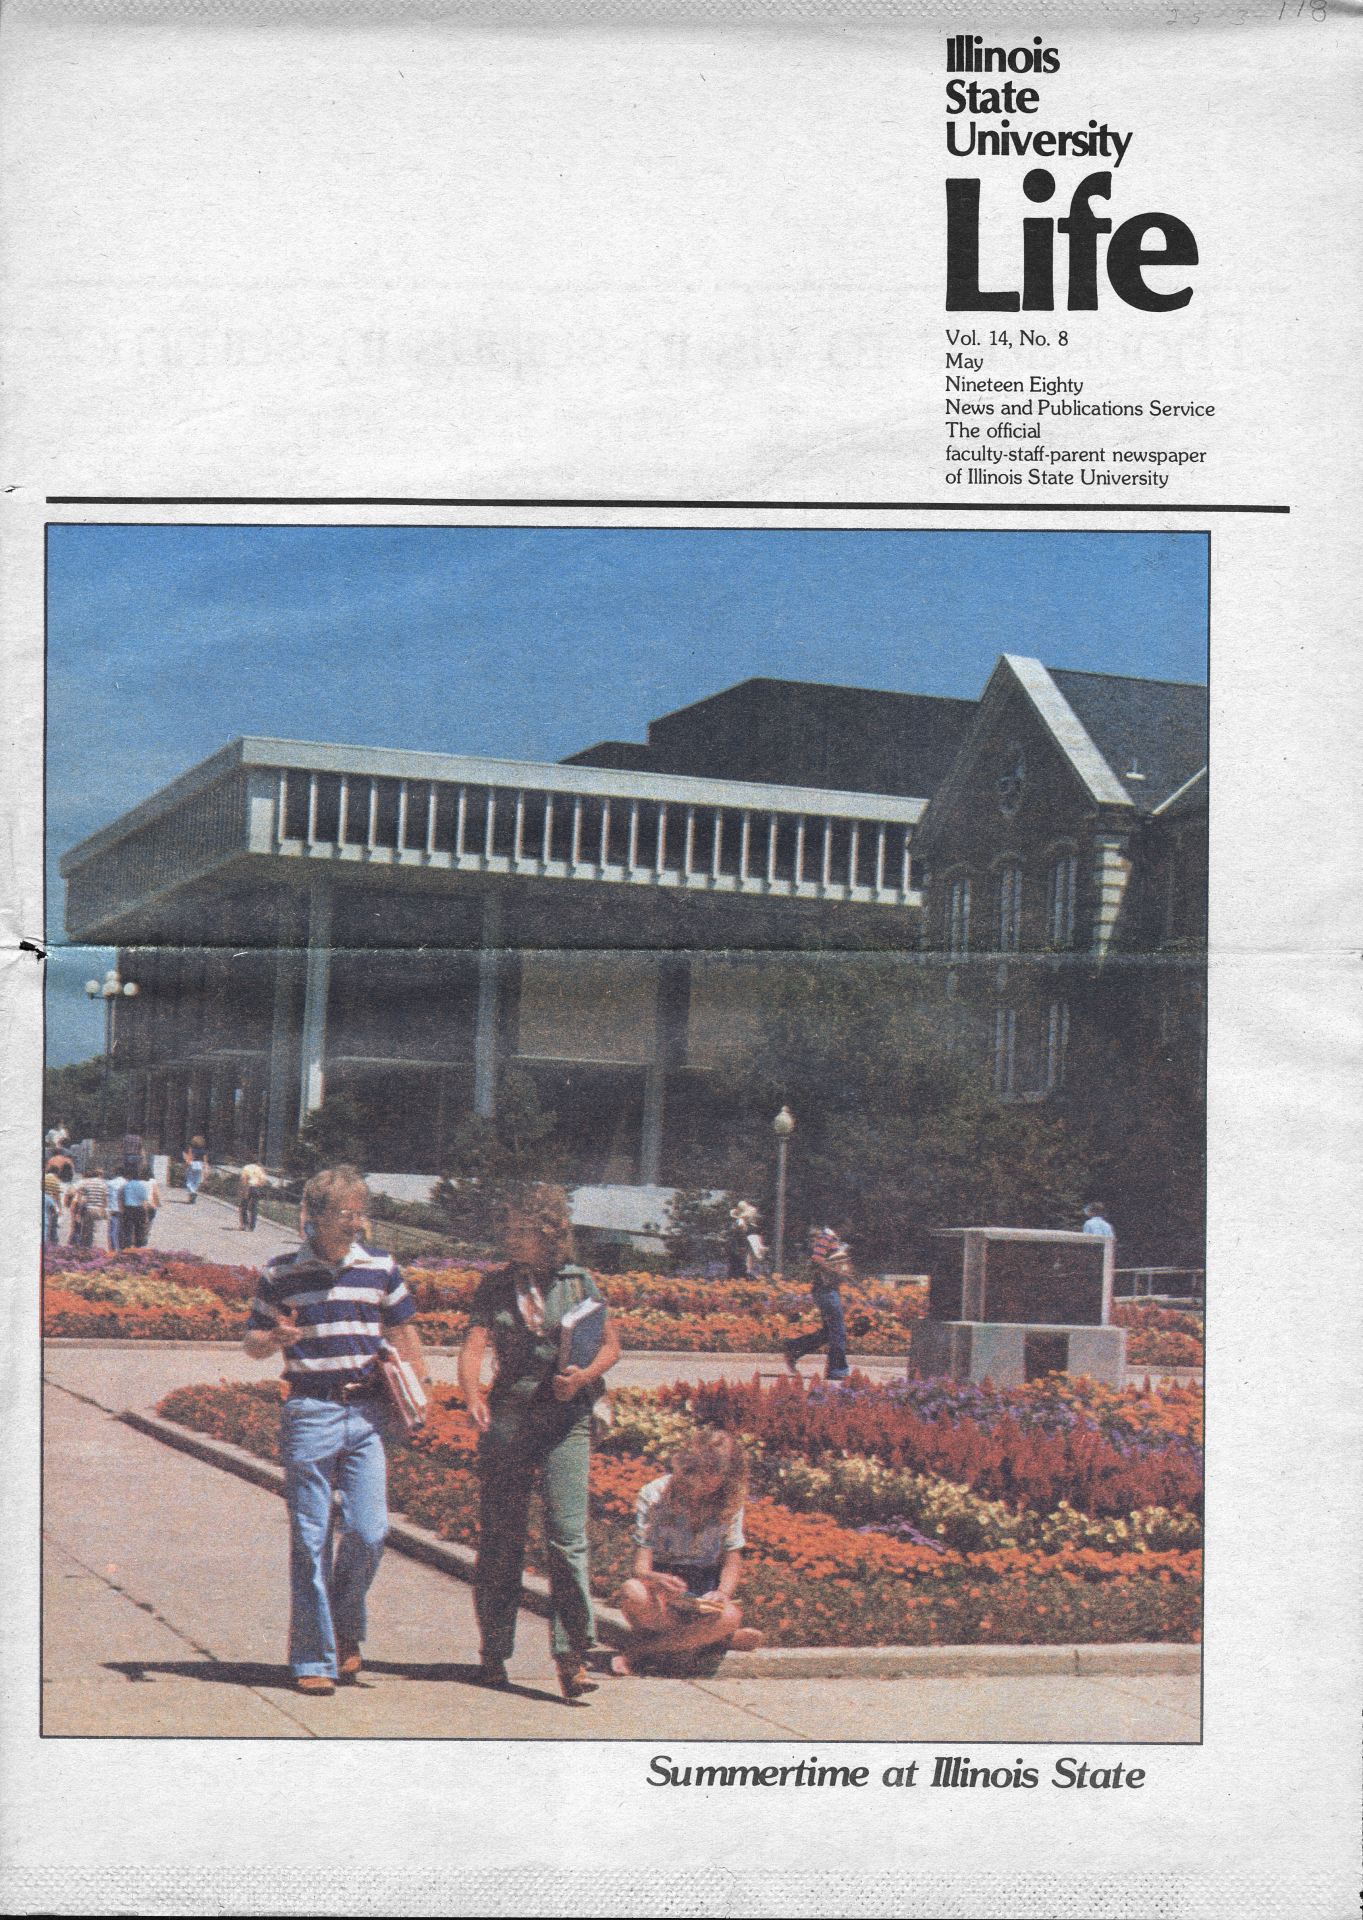 ISU Life publication cover from May 1980